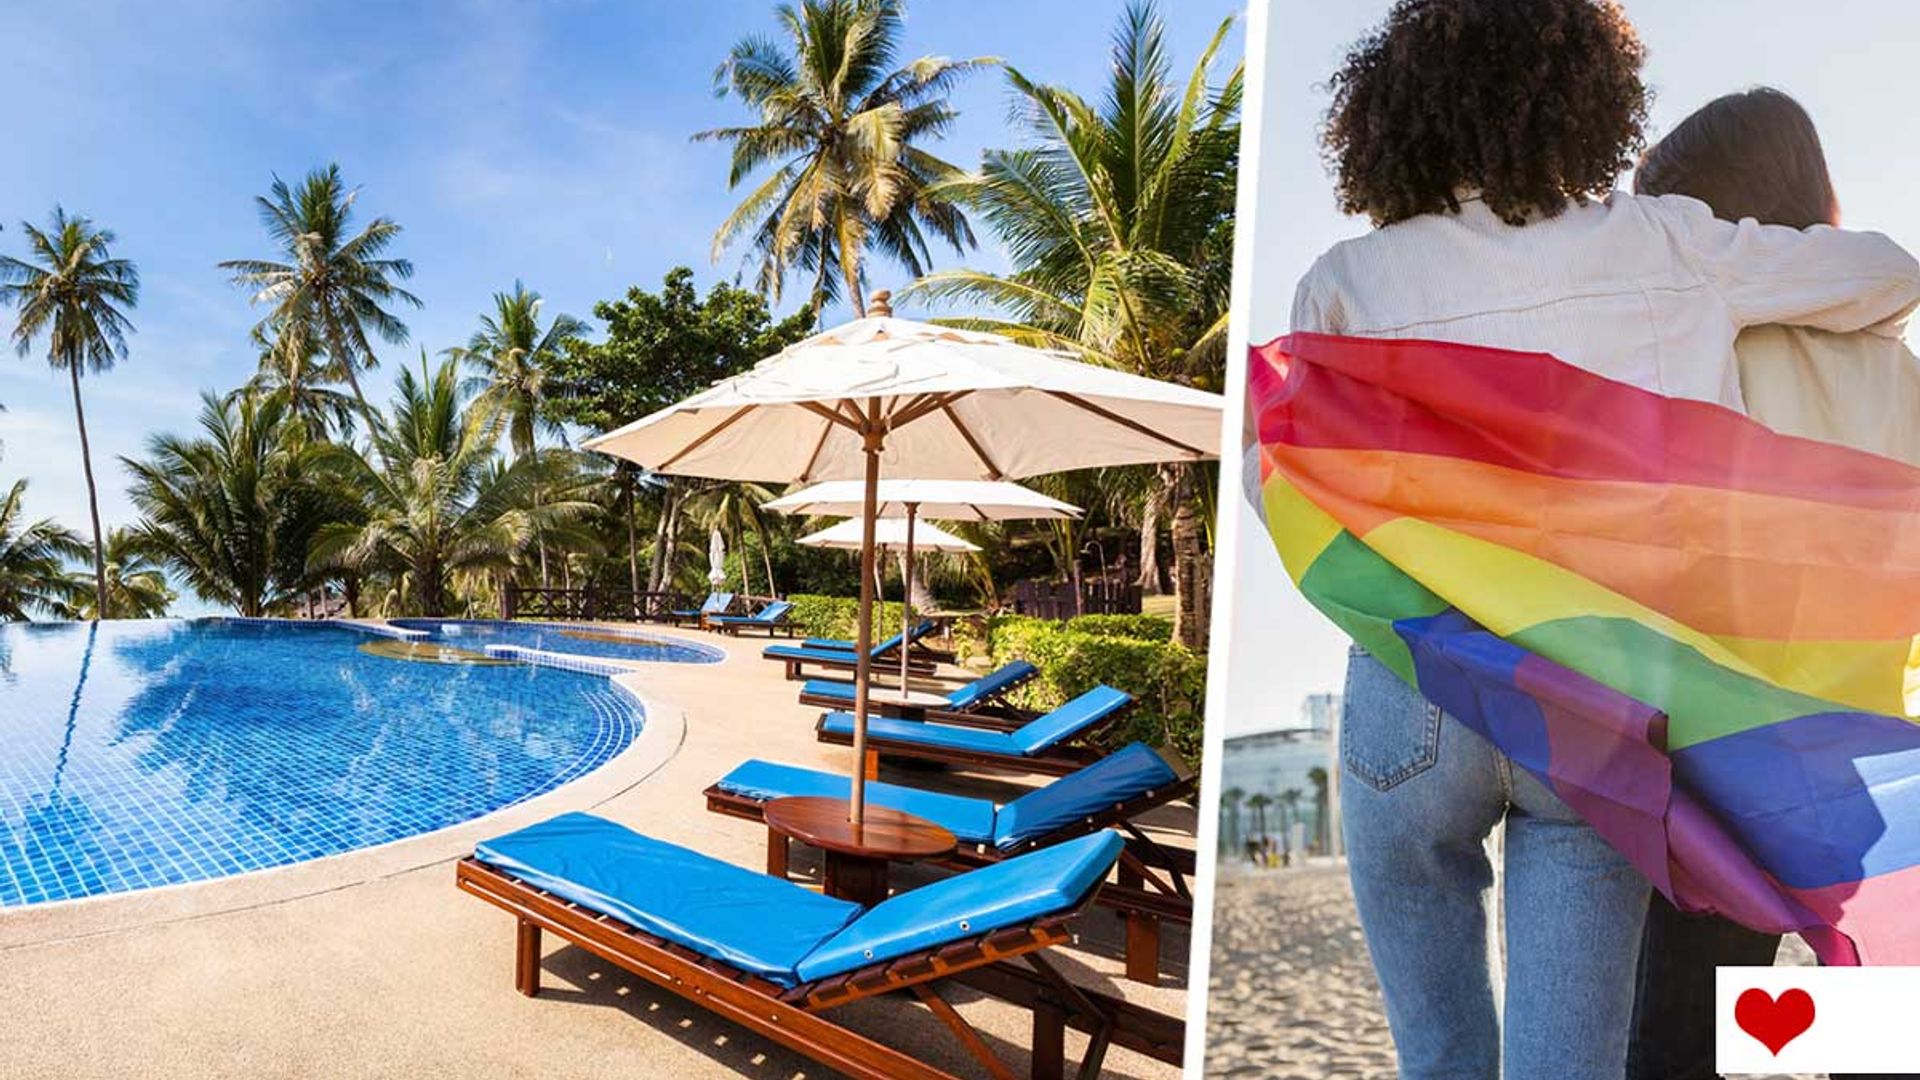 7 LGBTQ+ friendly hotels around the world you need to visit - a definitive guide